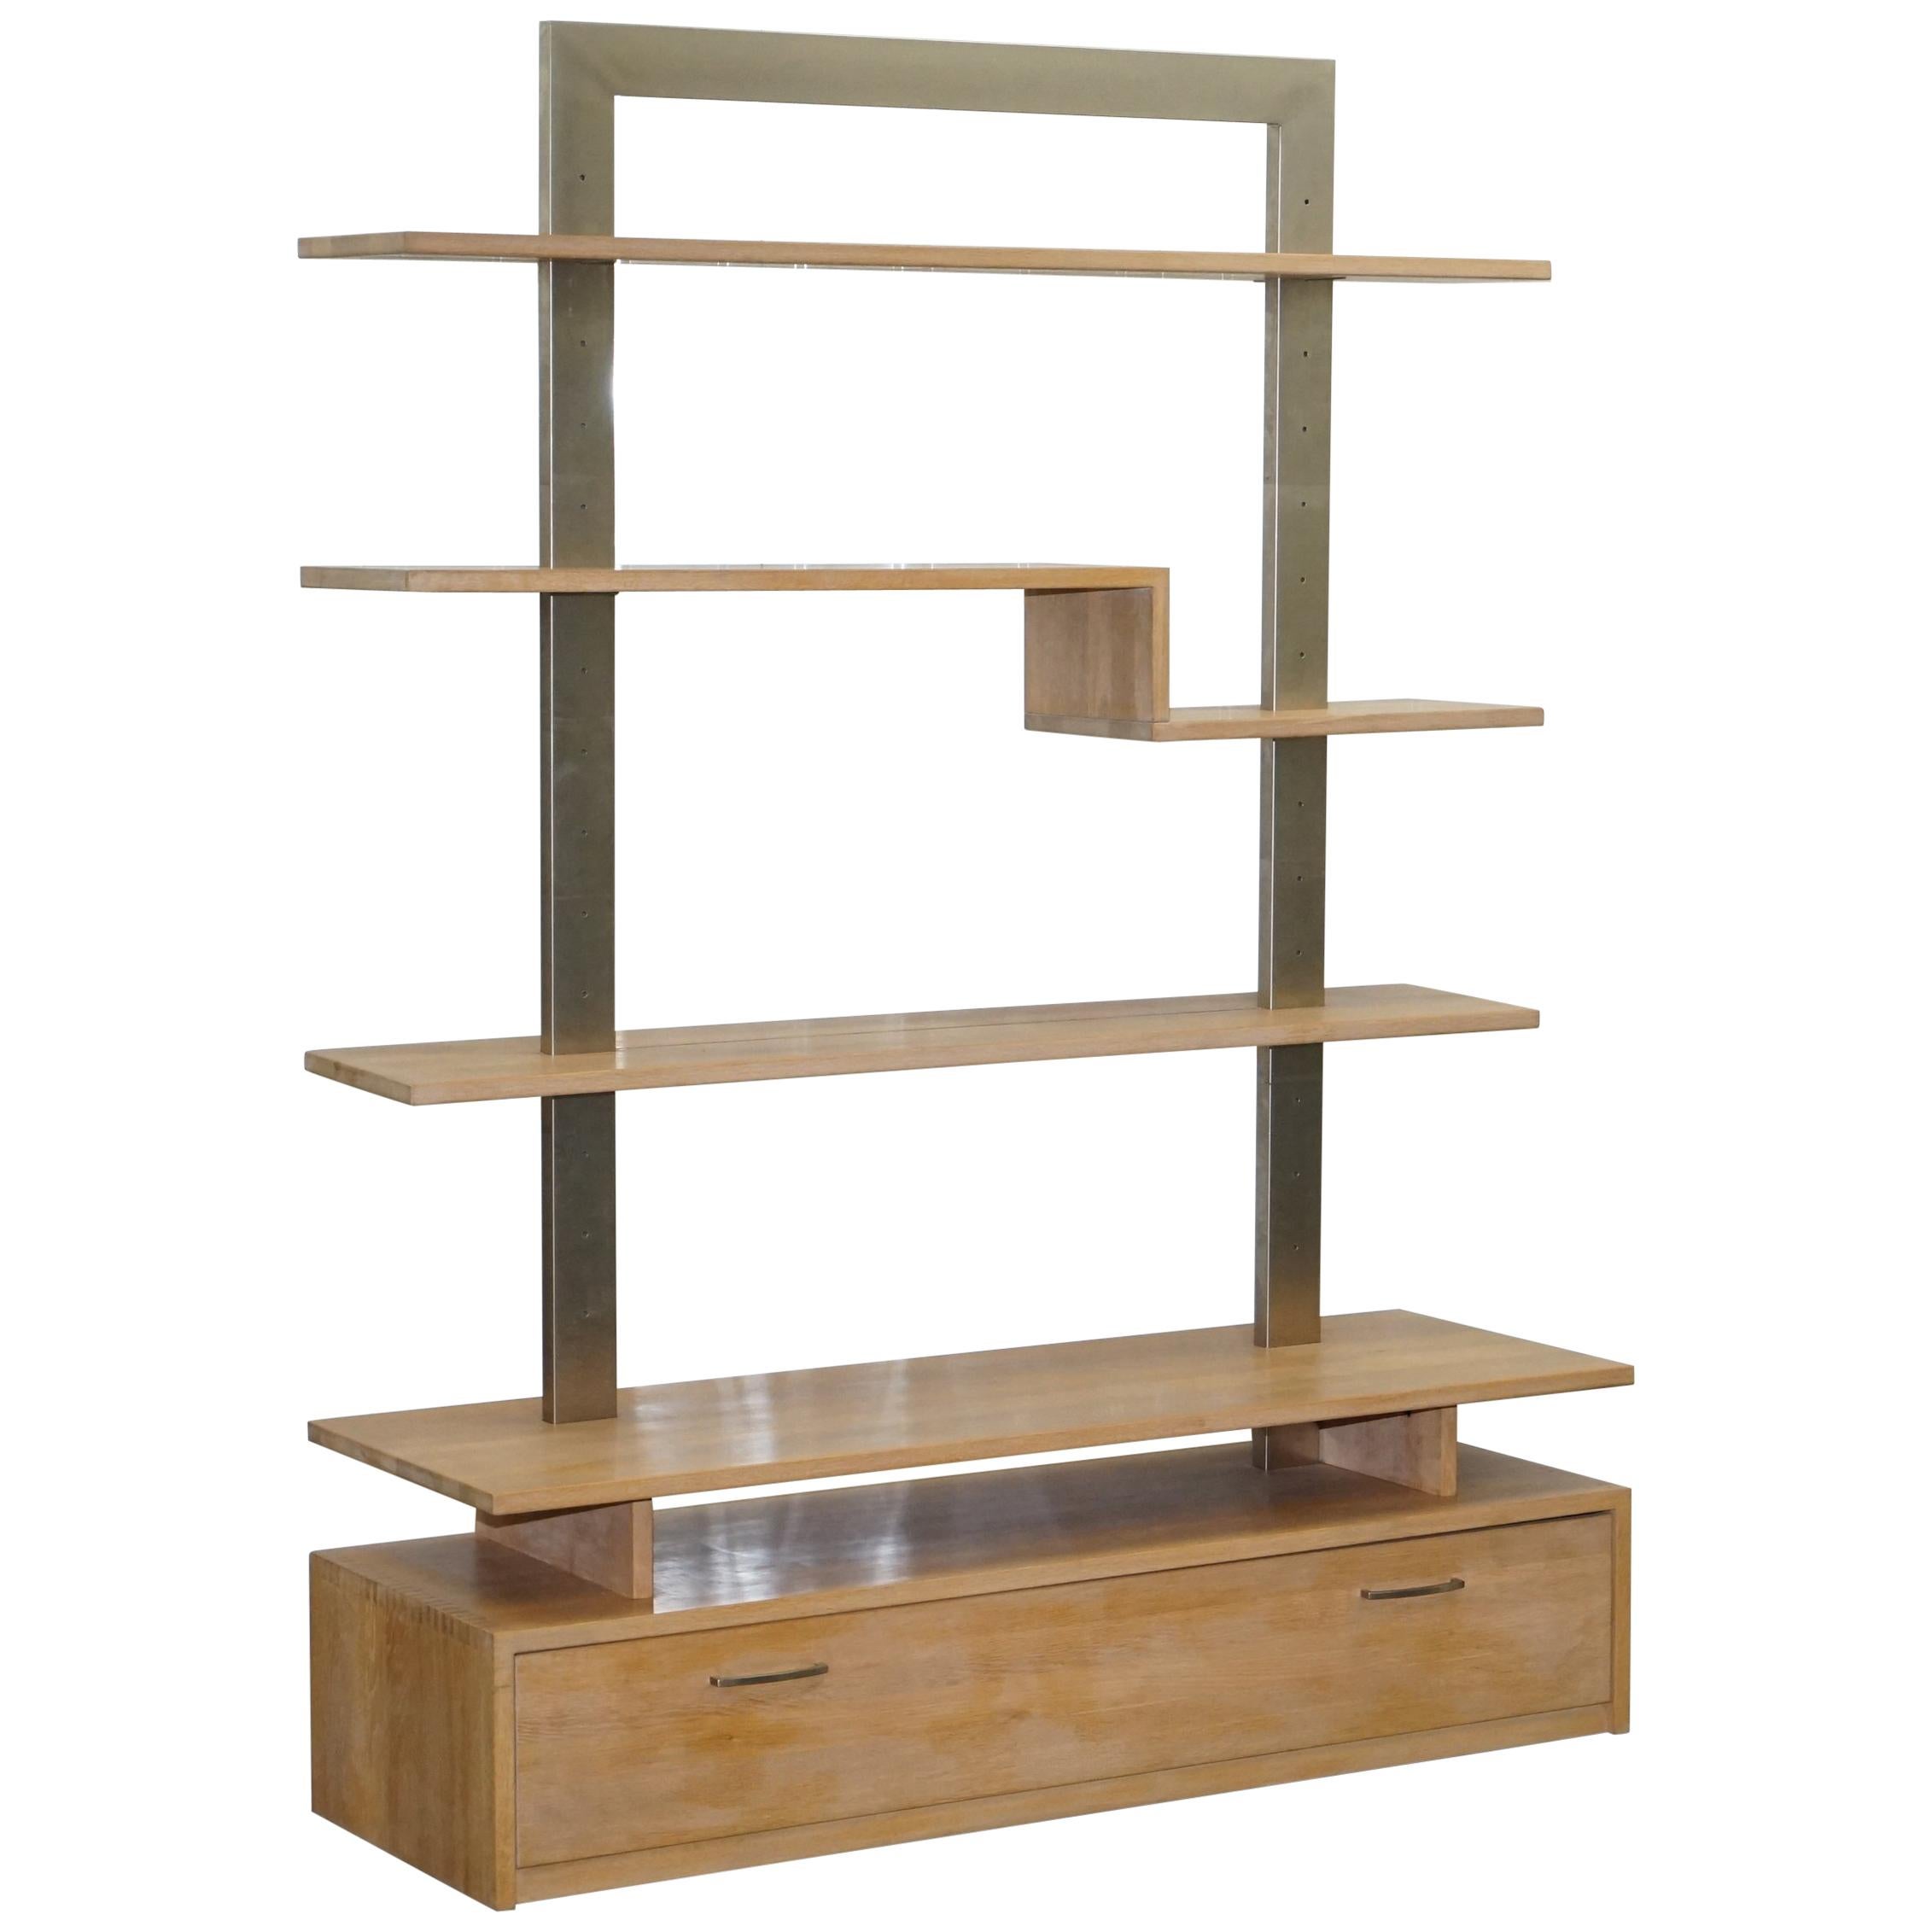 Orum Mobler Chrome and Ash Bookcase Height Adjustable Shelves and Drawer